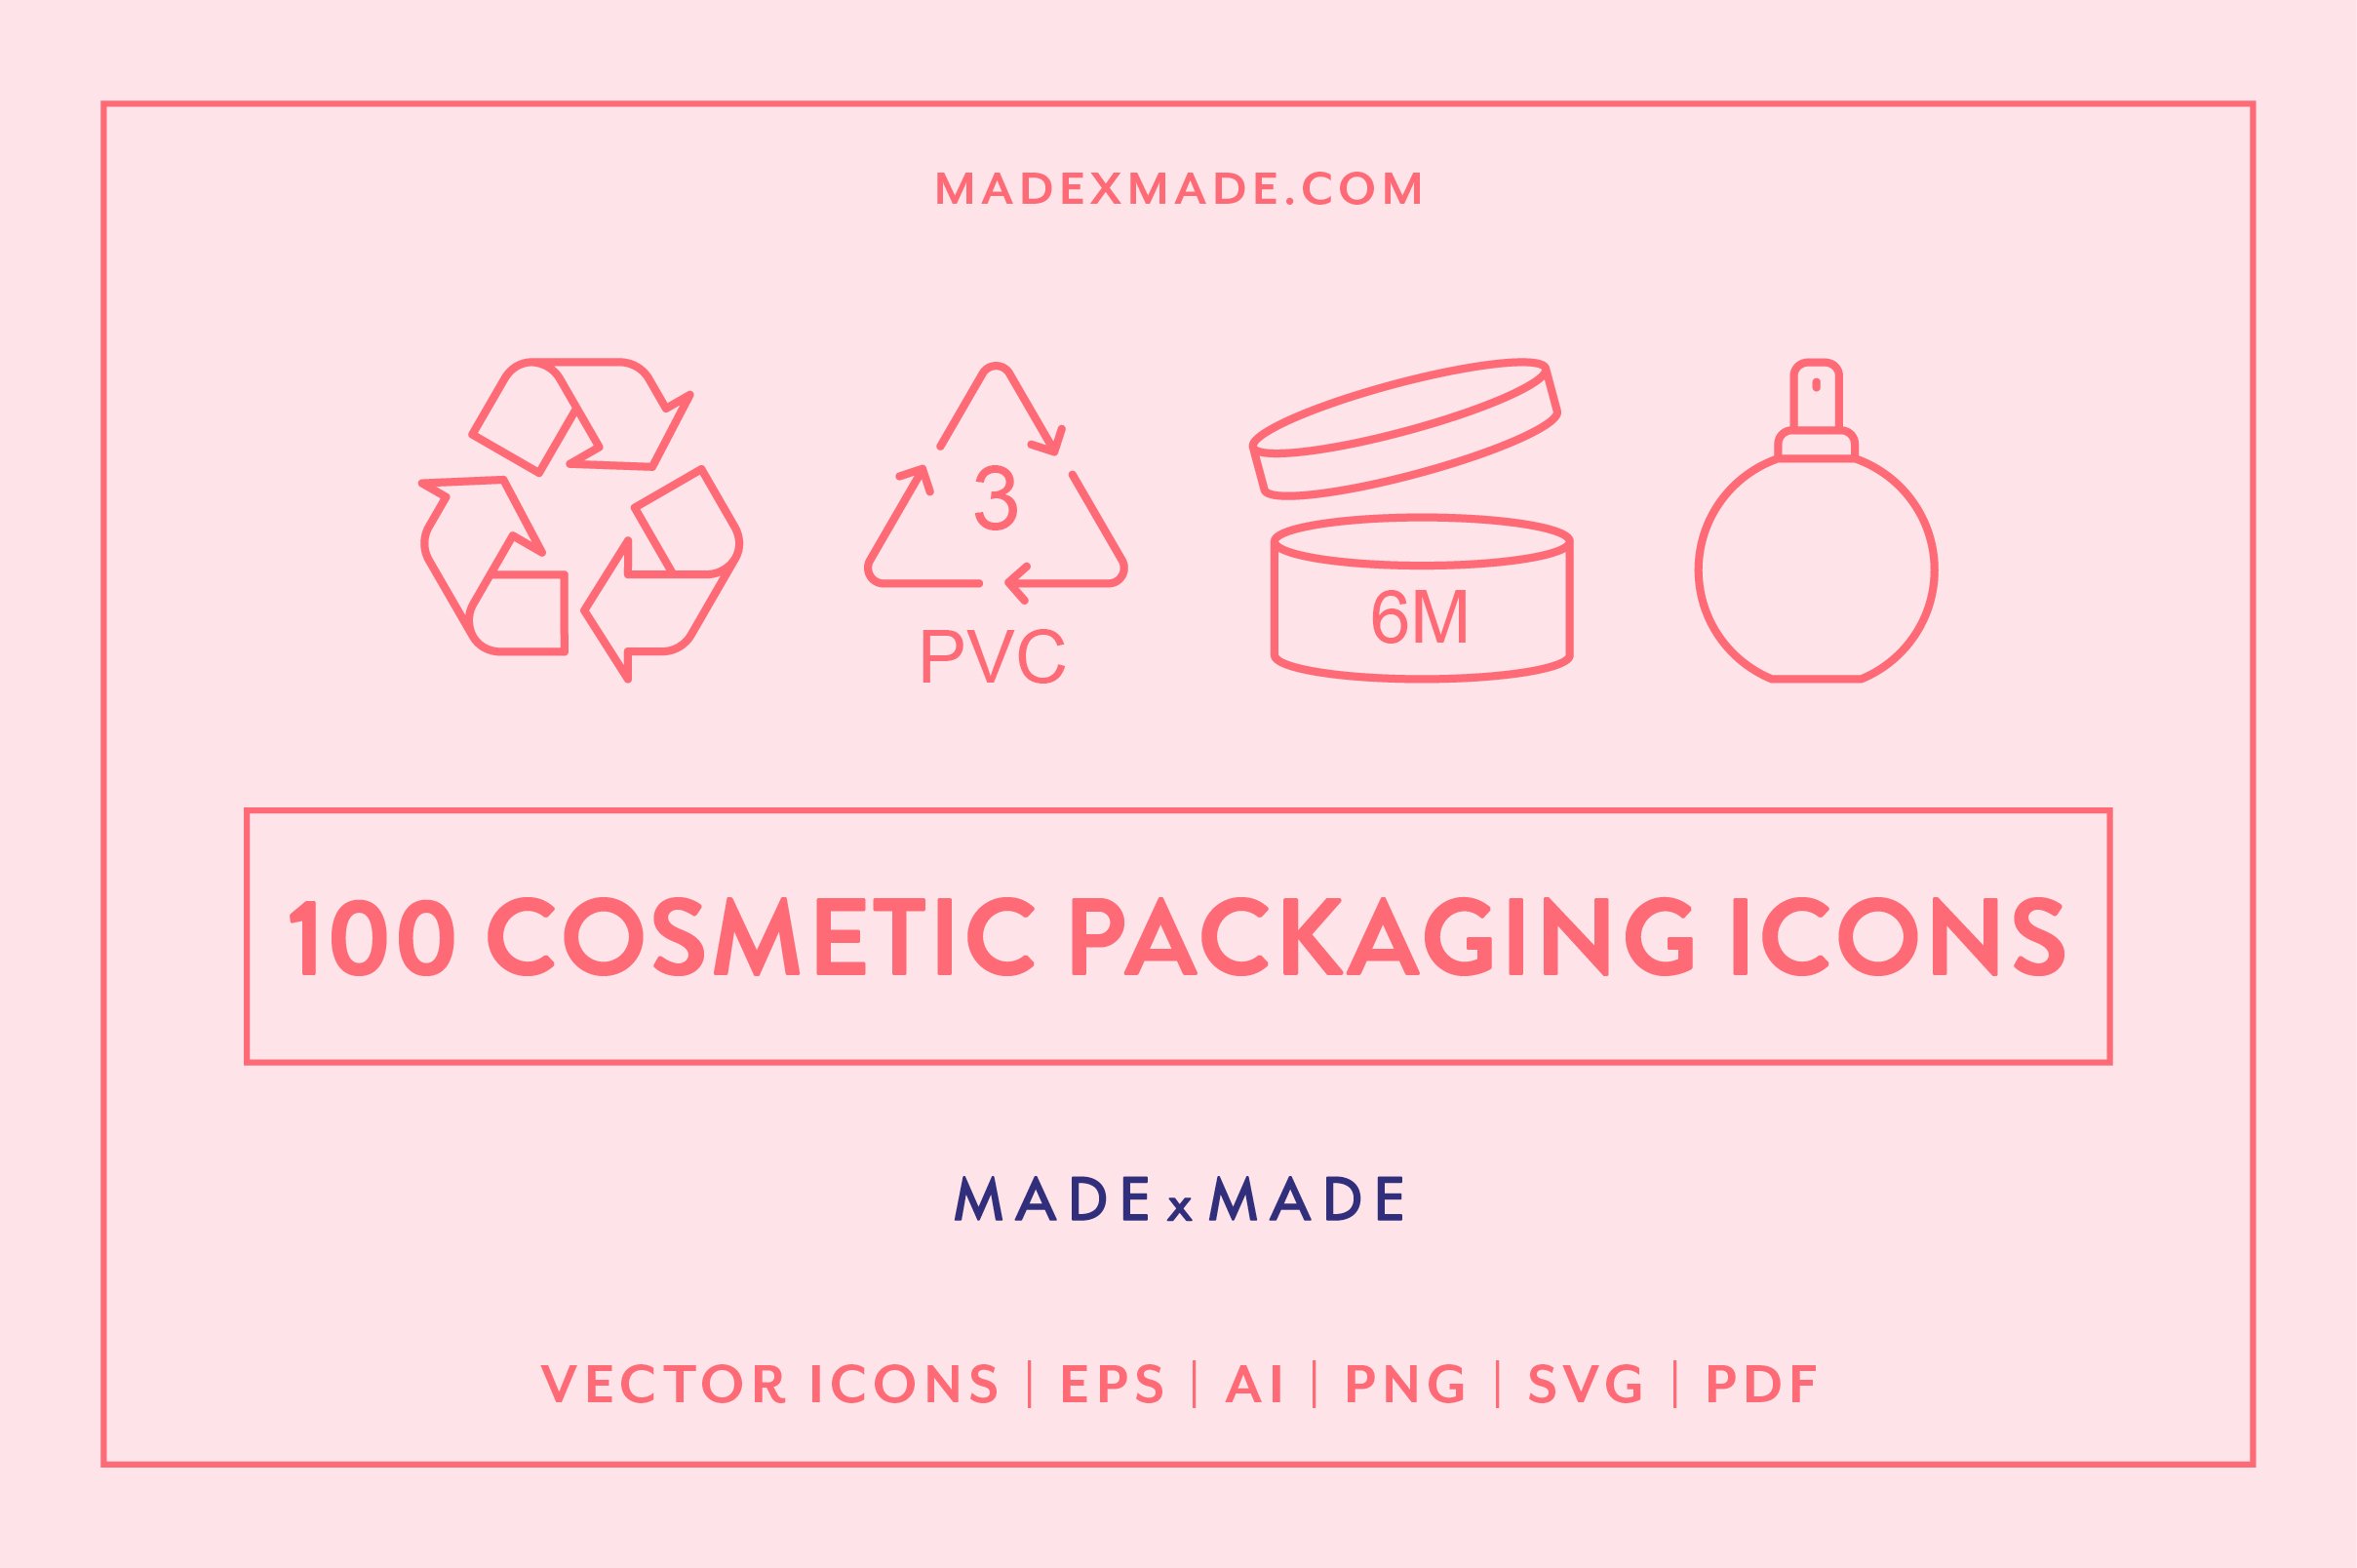 Cosmetic Packaging Line Icons cover image.